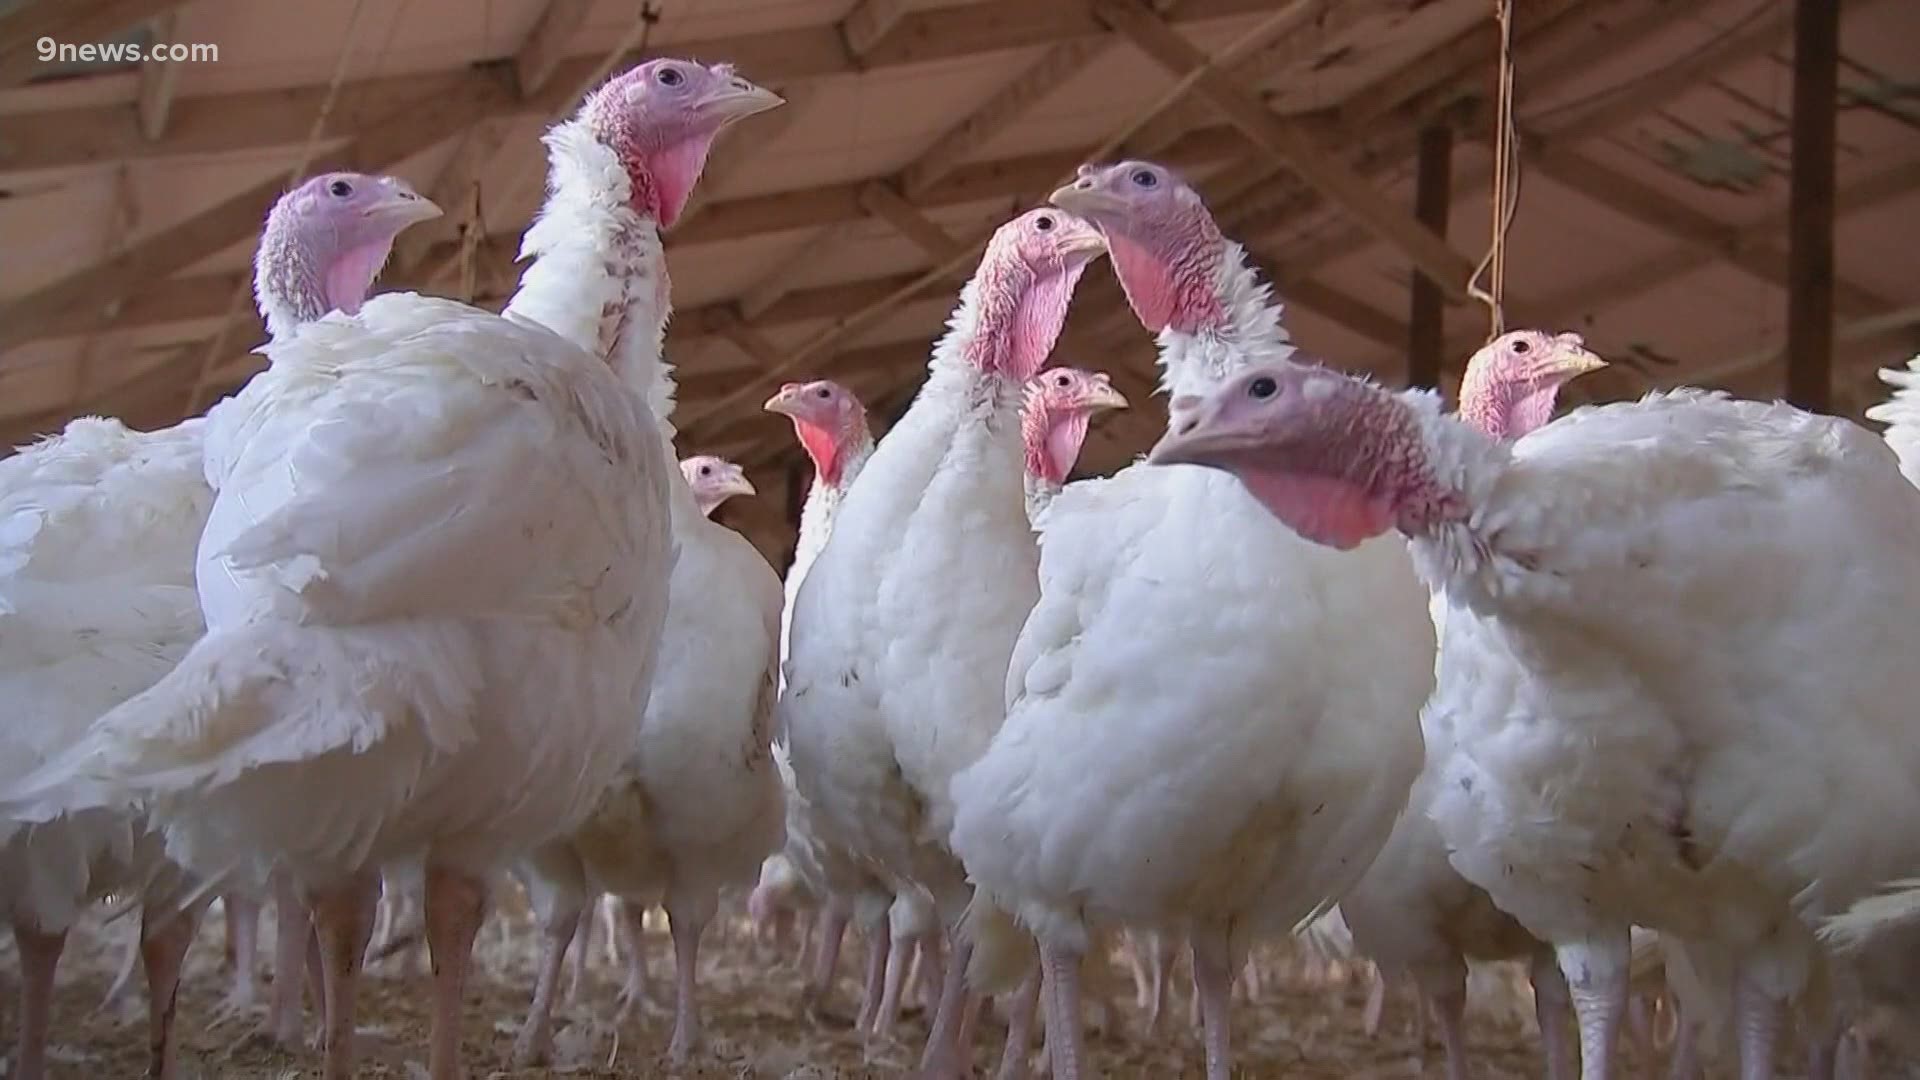 The turkey market is a lot different this year due to the coronavirus pandemic. Smaller birds are in demand as people social distance, impacting farmer's plans.